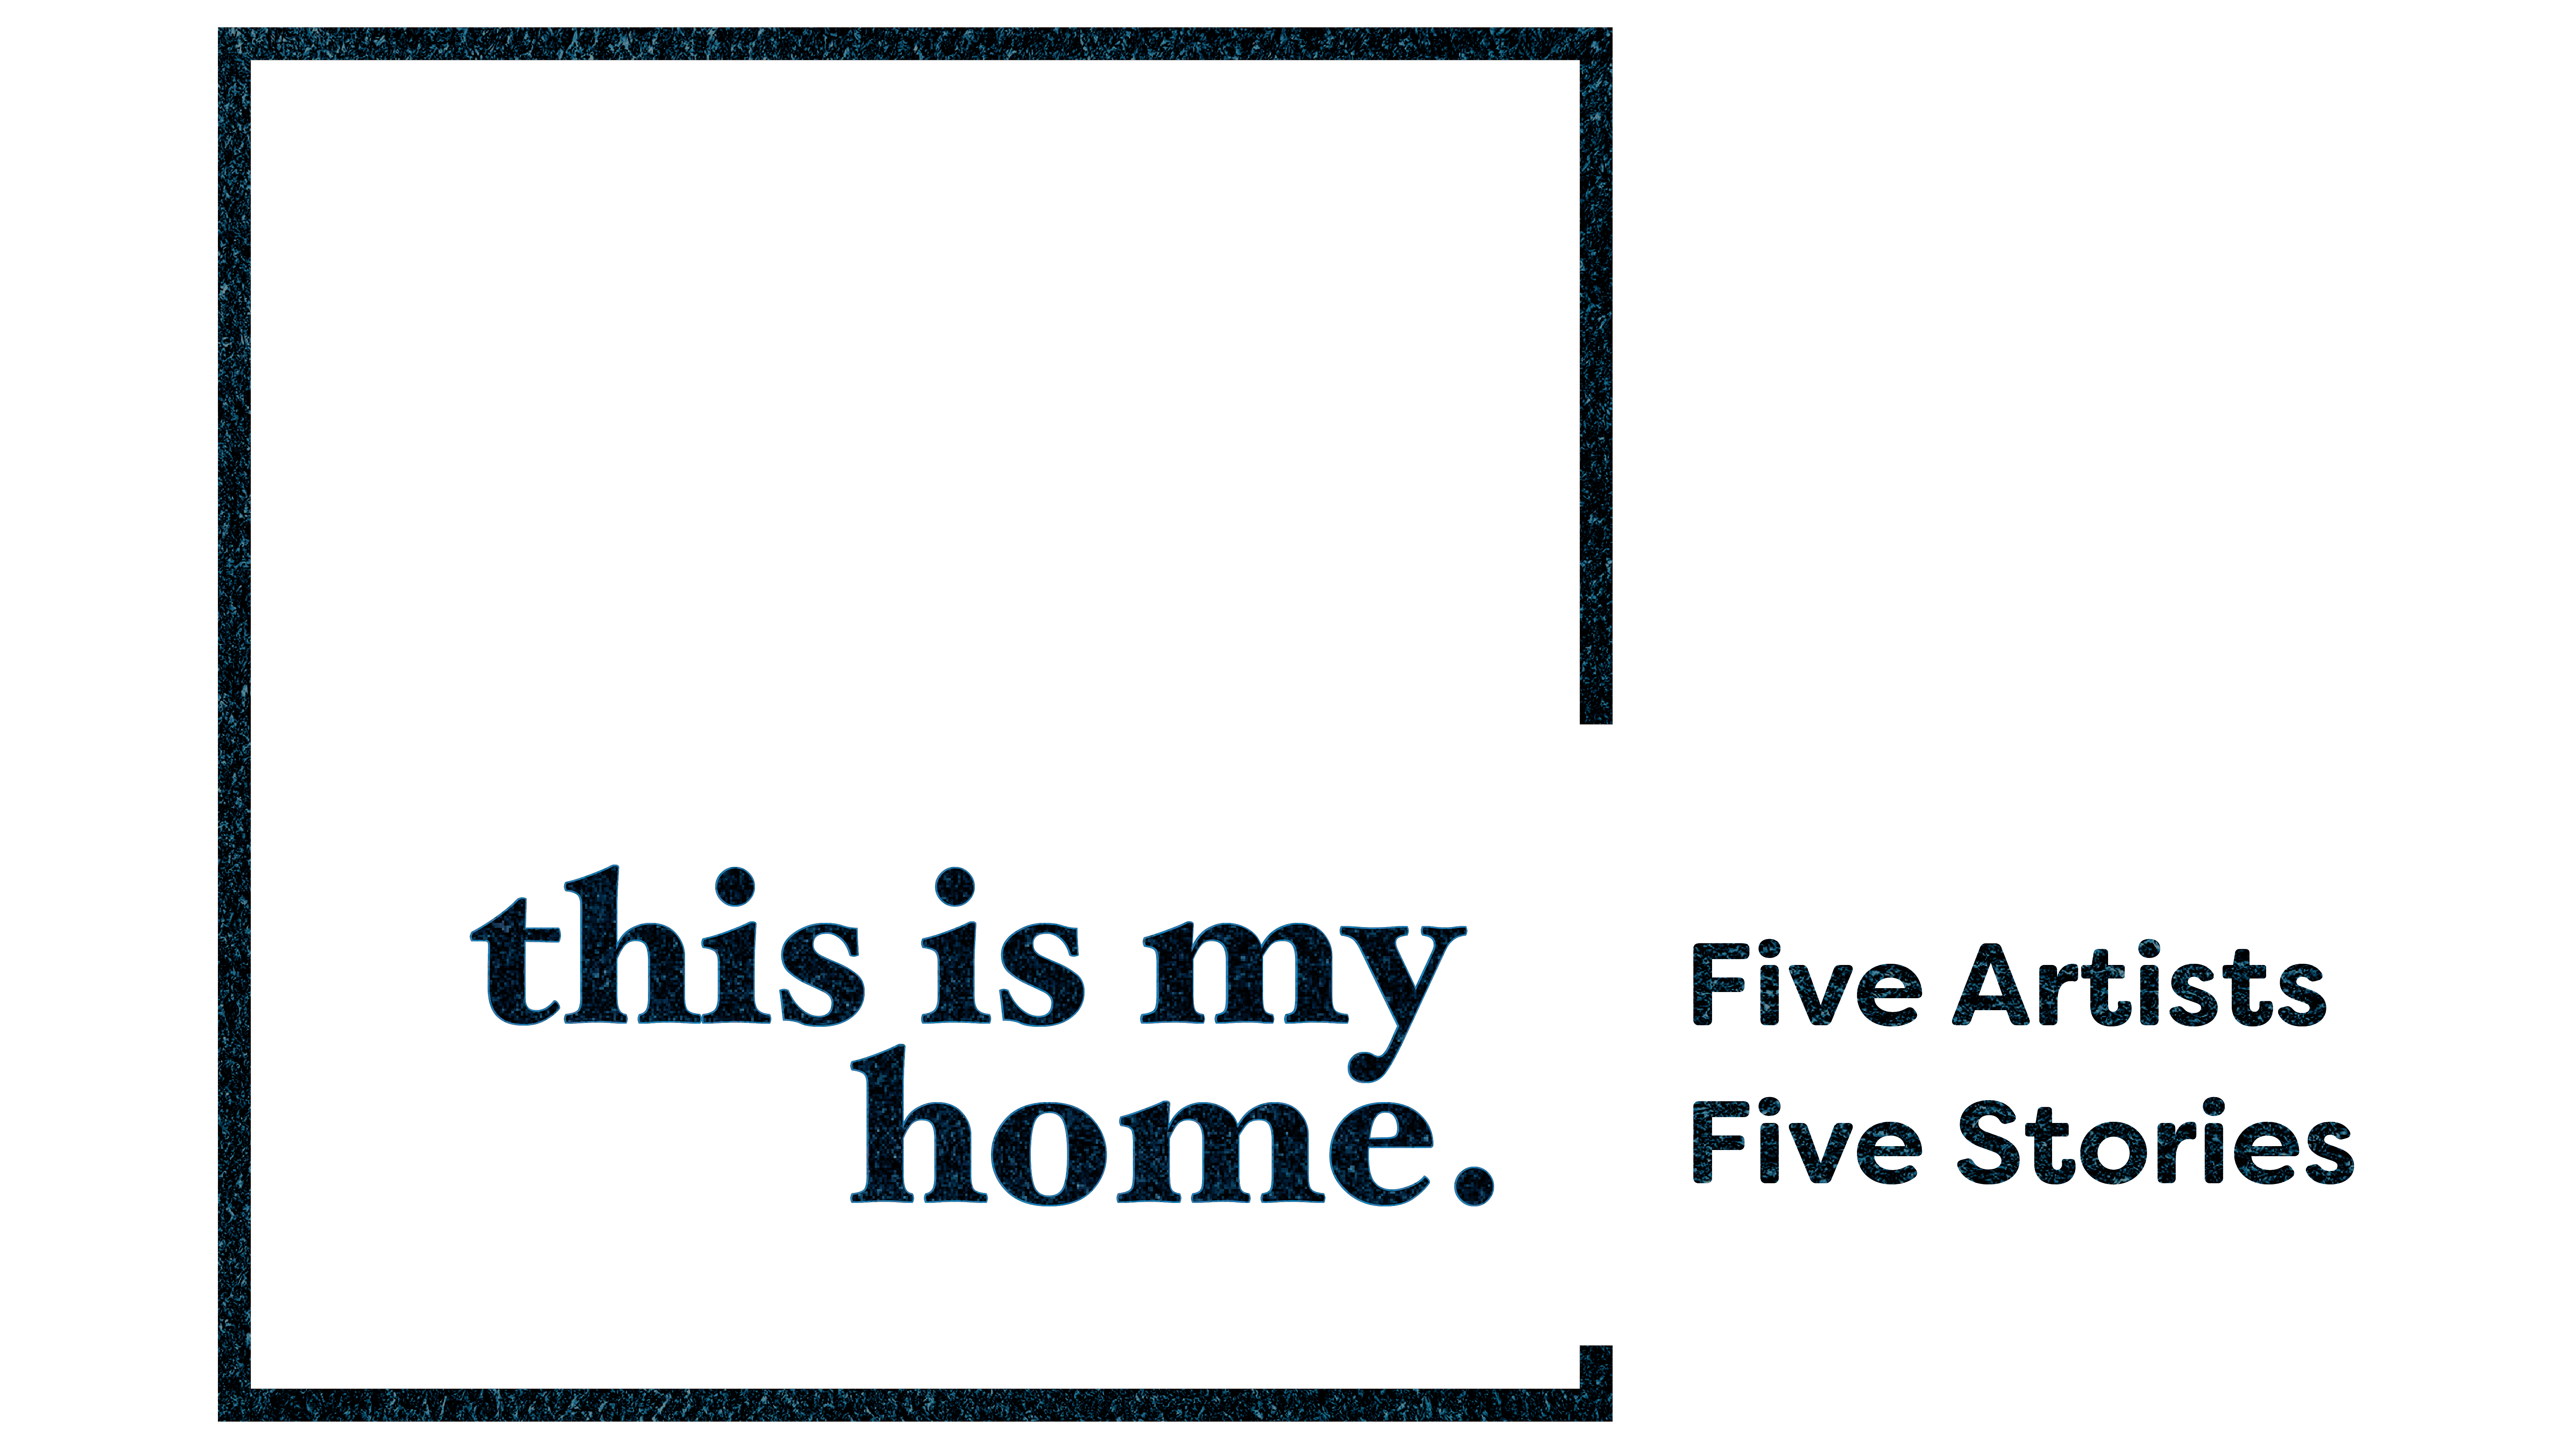 This is My Home exhibit logo